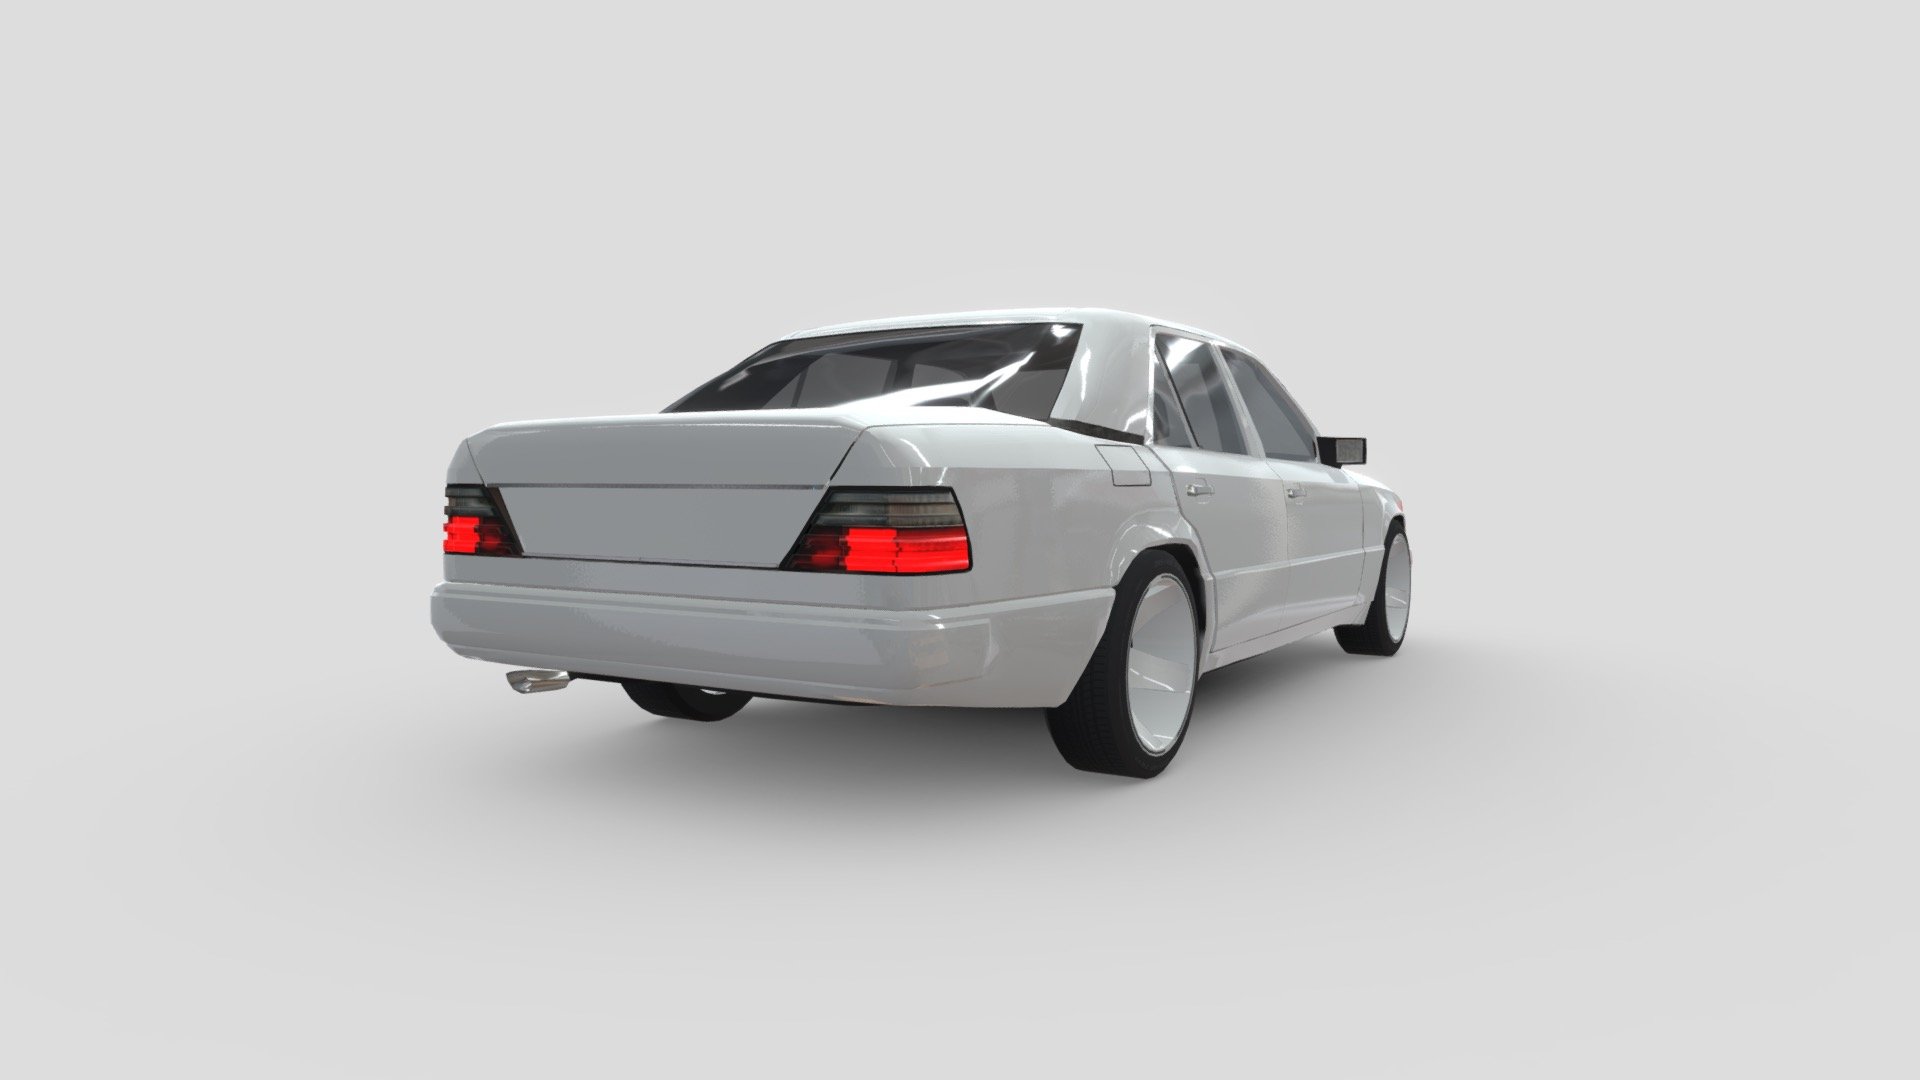 Mercedes Benz w124

Low Poly
Game ready
Mobile optimization - Mercedes Benz w124 - 3D model by BrushWork 3d model